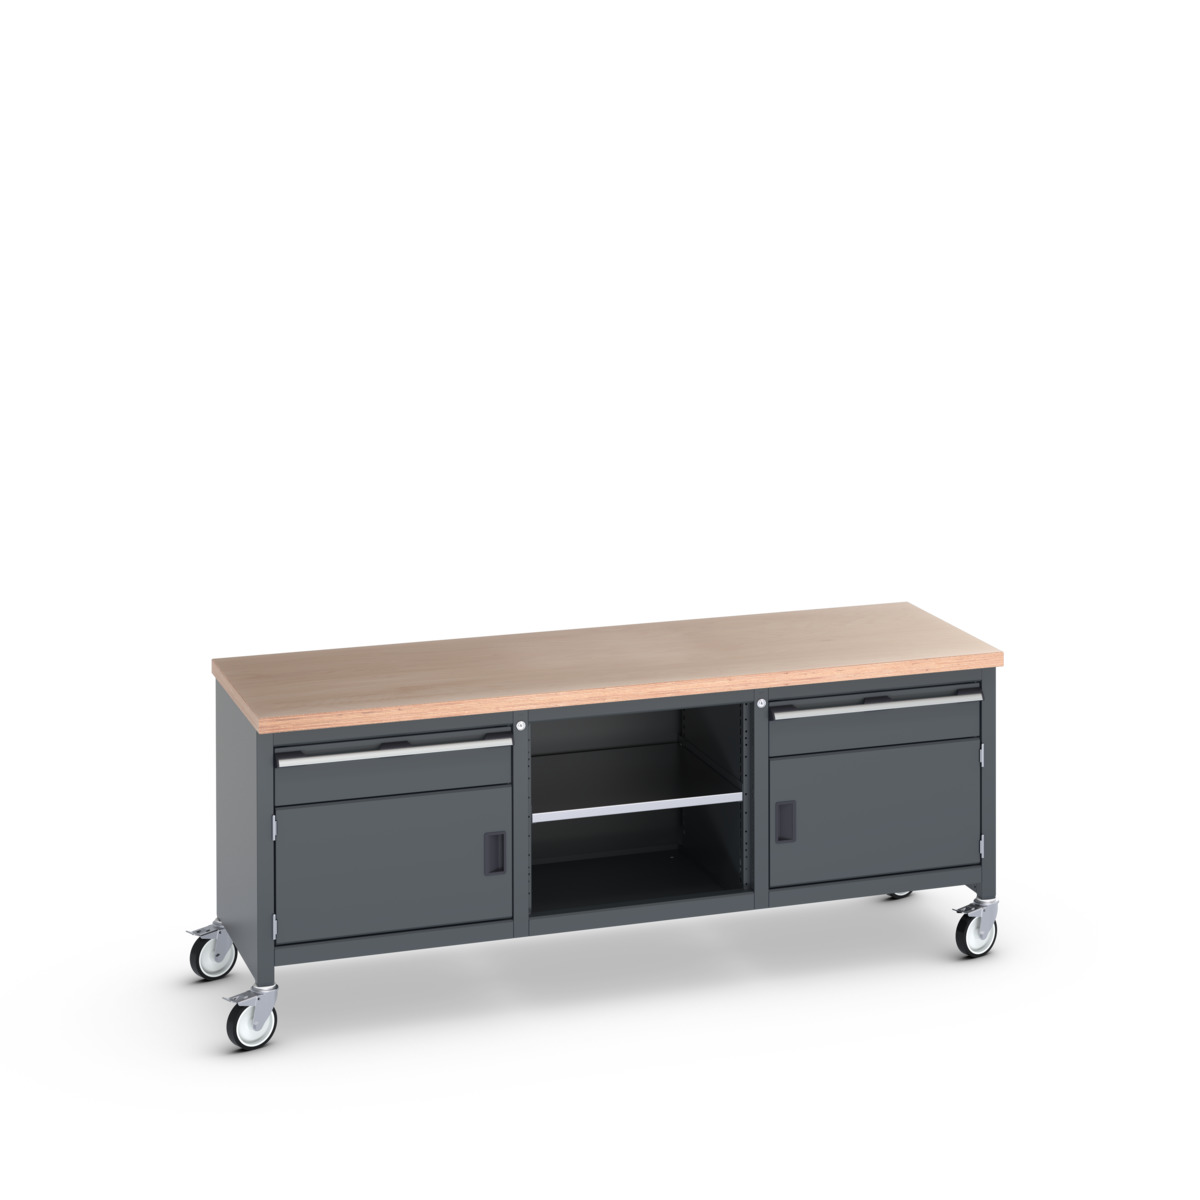 41002121.77V - cubio mobile storage bench (mpx)